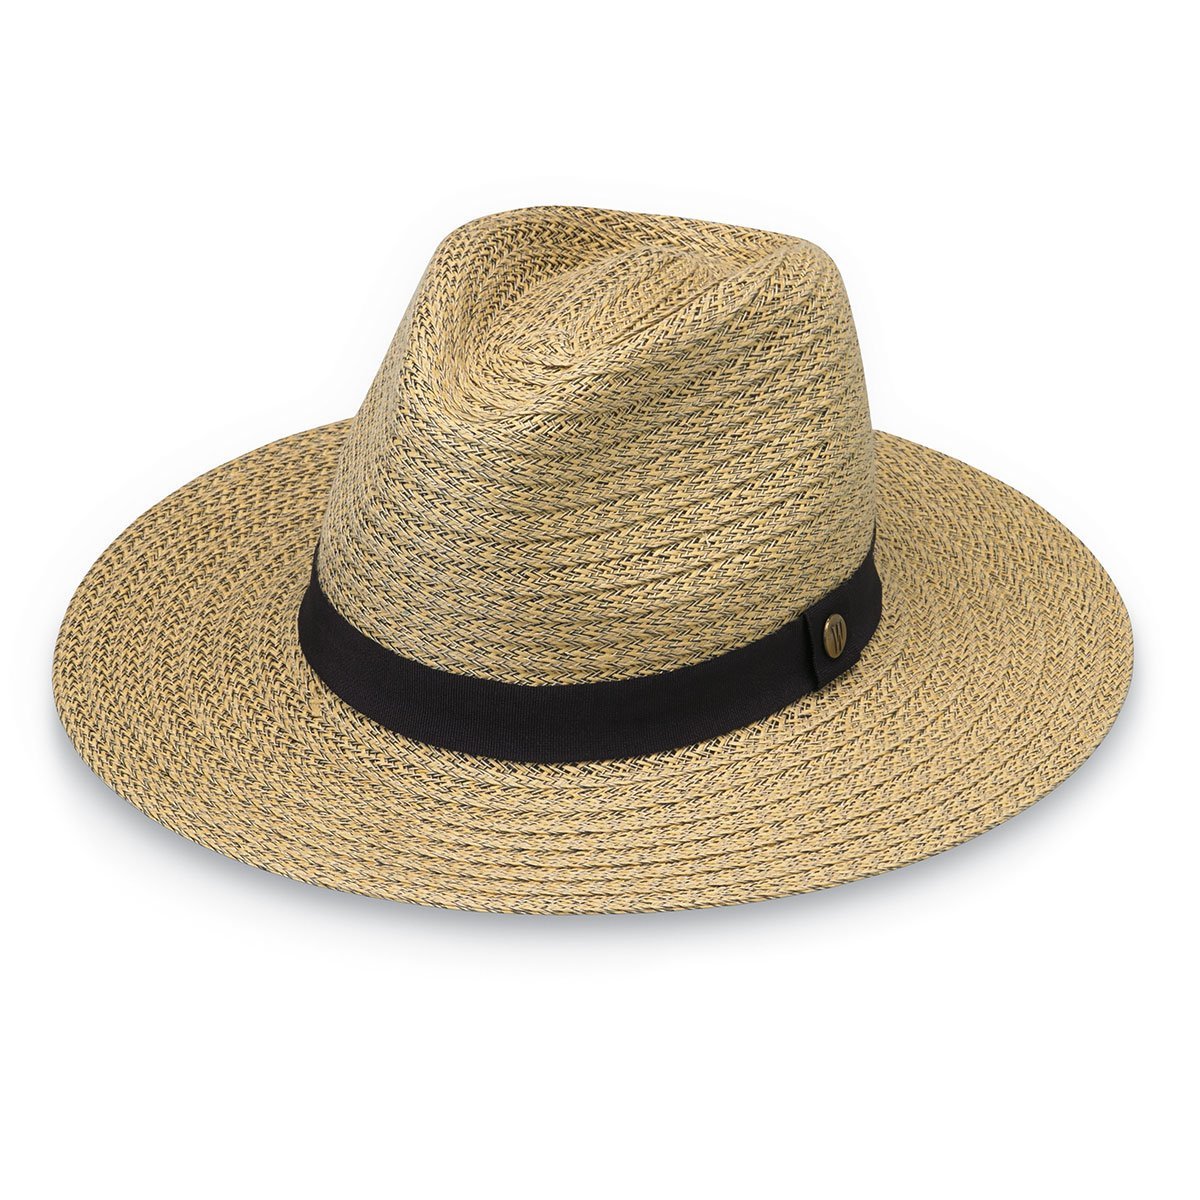 Featuring Men's Packable Fedora Style Palmer UPF Summer Sun Hat in Natural from Wallaroo